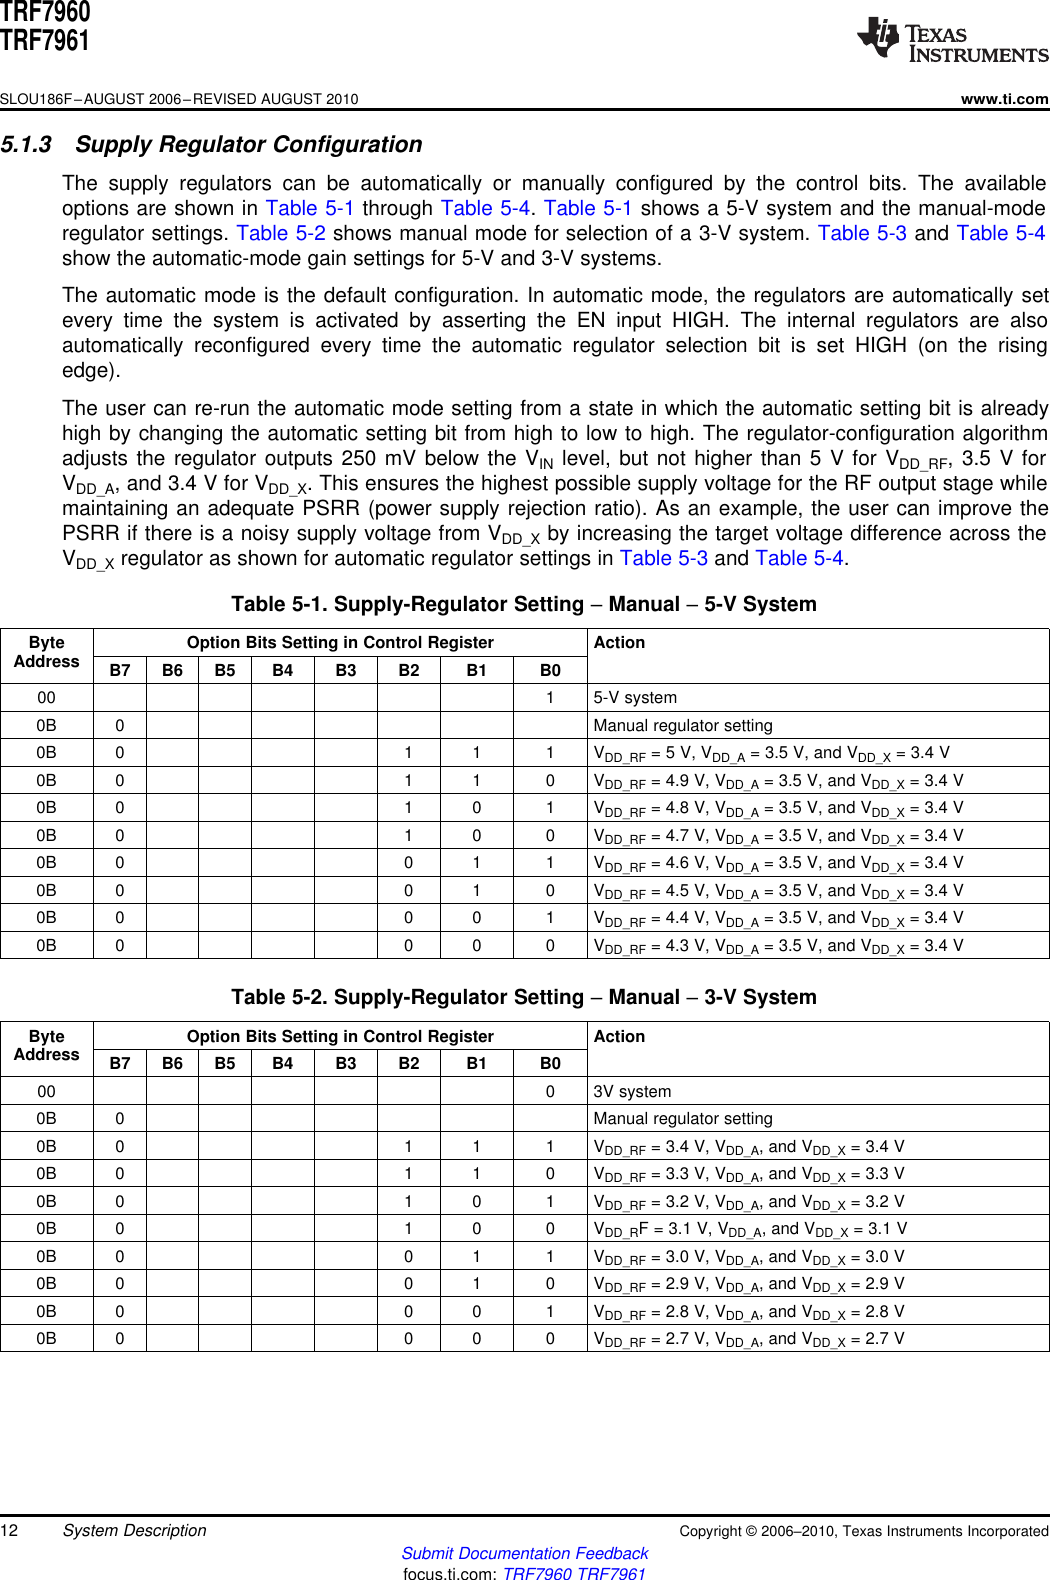 TRF7960TRF7961SLOU186F–AUGUST 2006–REVISED AUGUST 2010www.ti.com5.1.3 Supply Regulator ConfigurationThe supply regulators can be automatically or manually configured by the control bits. The availableoptions are shown in Table 5-1 through Table 5-4.Table 5-1 shows a 5-V system and the manual-moderegulator settings. Table 5-2 shows manual mode for selection of a 3-V system. Table 5-3 and Table 5-4show the automatic-mode gain settings for 5-V and 3-V systems.The automatic mode is the default configuration. In automatic mode, the regulators are automatically setevery time the system is activated by asserting the EN input HIGH. The internal regulators are alsoautomatically reconfigured every time the automatic regulator selection bit is set HIGH (on the risingedge).The user can re-run the automatic mode setting from a state in which the automatic setting bit is alreadyhigh by changing the automatic setting bit from high to low to high. The regulator-configuration algorithmadjusts the regulator outputs 250 mV below the VIN level, but not higher than 5 V for VDD_RF, 3.5 V forVDD_A, and 3.4 V for VDD_X. This ensures the highest possible supply voltage for the RF output stage whilemaintaining an adequate PSRR (power supply rejection ratio). As an example, the user can improve thePSRR if there is a noisy supply voltage from VDD_X by increasing the target voltage difference across theVDD_X regulator as shown for automatic regulator settings in Table 5-3 and Table 5-4.Table 5-1. Supply-Regulator Setting –Manual –5-V SystemByte Option Bits Setting in Control Register ActionAddress B7 B6 B5 B4 B3 B2 B1 B000 1 5-V system0B 0 Manual regulator setting0B 0 1 1 1 VDD_RF = 5 V, VDD_A = 3.5 V, and VDD_X = 3.4 V0B 0 1 1 0 VDD_RF = 4.9 V, VDD_A = 3.5 V, and VDD_X = 3.4 V0B 0 1 0 1 VDD_RF = 4.8 V, VDD_A = 3.5 V, and VDD_X = 3.4 V0B 0 1 0 0 VDD_RF = 4.7 V, VDD_A = 3.5 V, and VDD_X = 3.4 V0B 0 0 1 1 VDD_RF = 4.6 V, VDD_A = 3.5 V, and VDD_X = 3.4 V0B 0 0 1 0 VDD_RF = 4.5 V, VDD_A = 3.5 V, and VDD_X = 3.4 V0B 0 0 0 1 VDD_RF = 4.4 V, VDD_A = 3.5 V, and VDD_X = 3.4 V0B 0 0 0 0 VDD_RF = 4.3 V, VDD_A = 3.5 V, and VDD_X = 3.4 VTable 5-2. Supply-Regulator Setting –Manual –3-V SystemByte Option Bits Setting in Control Register ActionAddress B7 B6 B5 B4 B3 B2 B1 B000 0 3V system0B 0 Manual regulator setting0B 0 1 1 1 VDD_RF = 3.4 V, VDD_A, and VDD_X = 3.4 V0B 0 1 1 0 VDD_RF = 3.3 V, VDD_A, and VDD_X = 3.3 V0B 0 1 0 1 VDD_RF = 3.2 V, VDD_A, and VDD_X = 3.2 V0B 0 1 0 0 VDD_RF = 3.1 V, VDD_A, and VDD_X = 3.1 V0B 0 0 1 1 VDD_RF = 3.0 V, VDD_A, and VDD_X = 3.0 V0B 0 0 1 0 VDD_RF = 2.9 V, VDD_A, and VDD_X = 2.9 V0B 0 0 0 1 VDD_RF = 2.8 V, VDD_A, and VDD_X = 2.8 V0B 0 0 0 0 VDD_RF = 2.7 V, VDD_A, and VDD_X = 2.7 V12 System Description Copyright ©2006–2010, Texas Instruments IncorporatedSubmit Documentation Feedbackfocus.ti.com: TRF7960 TRF7961